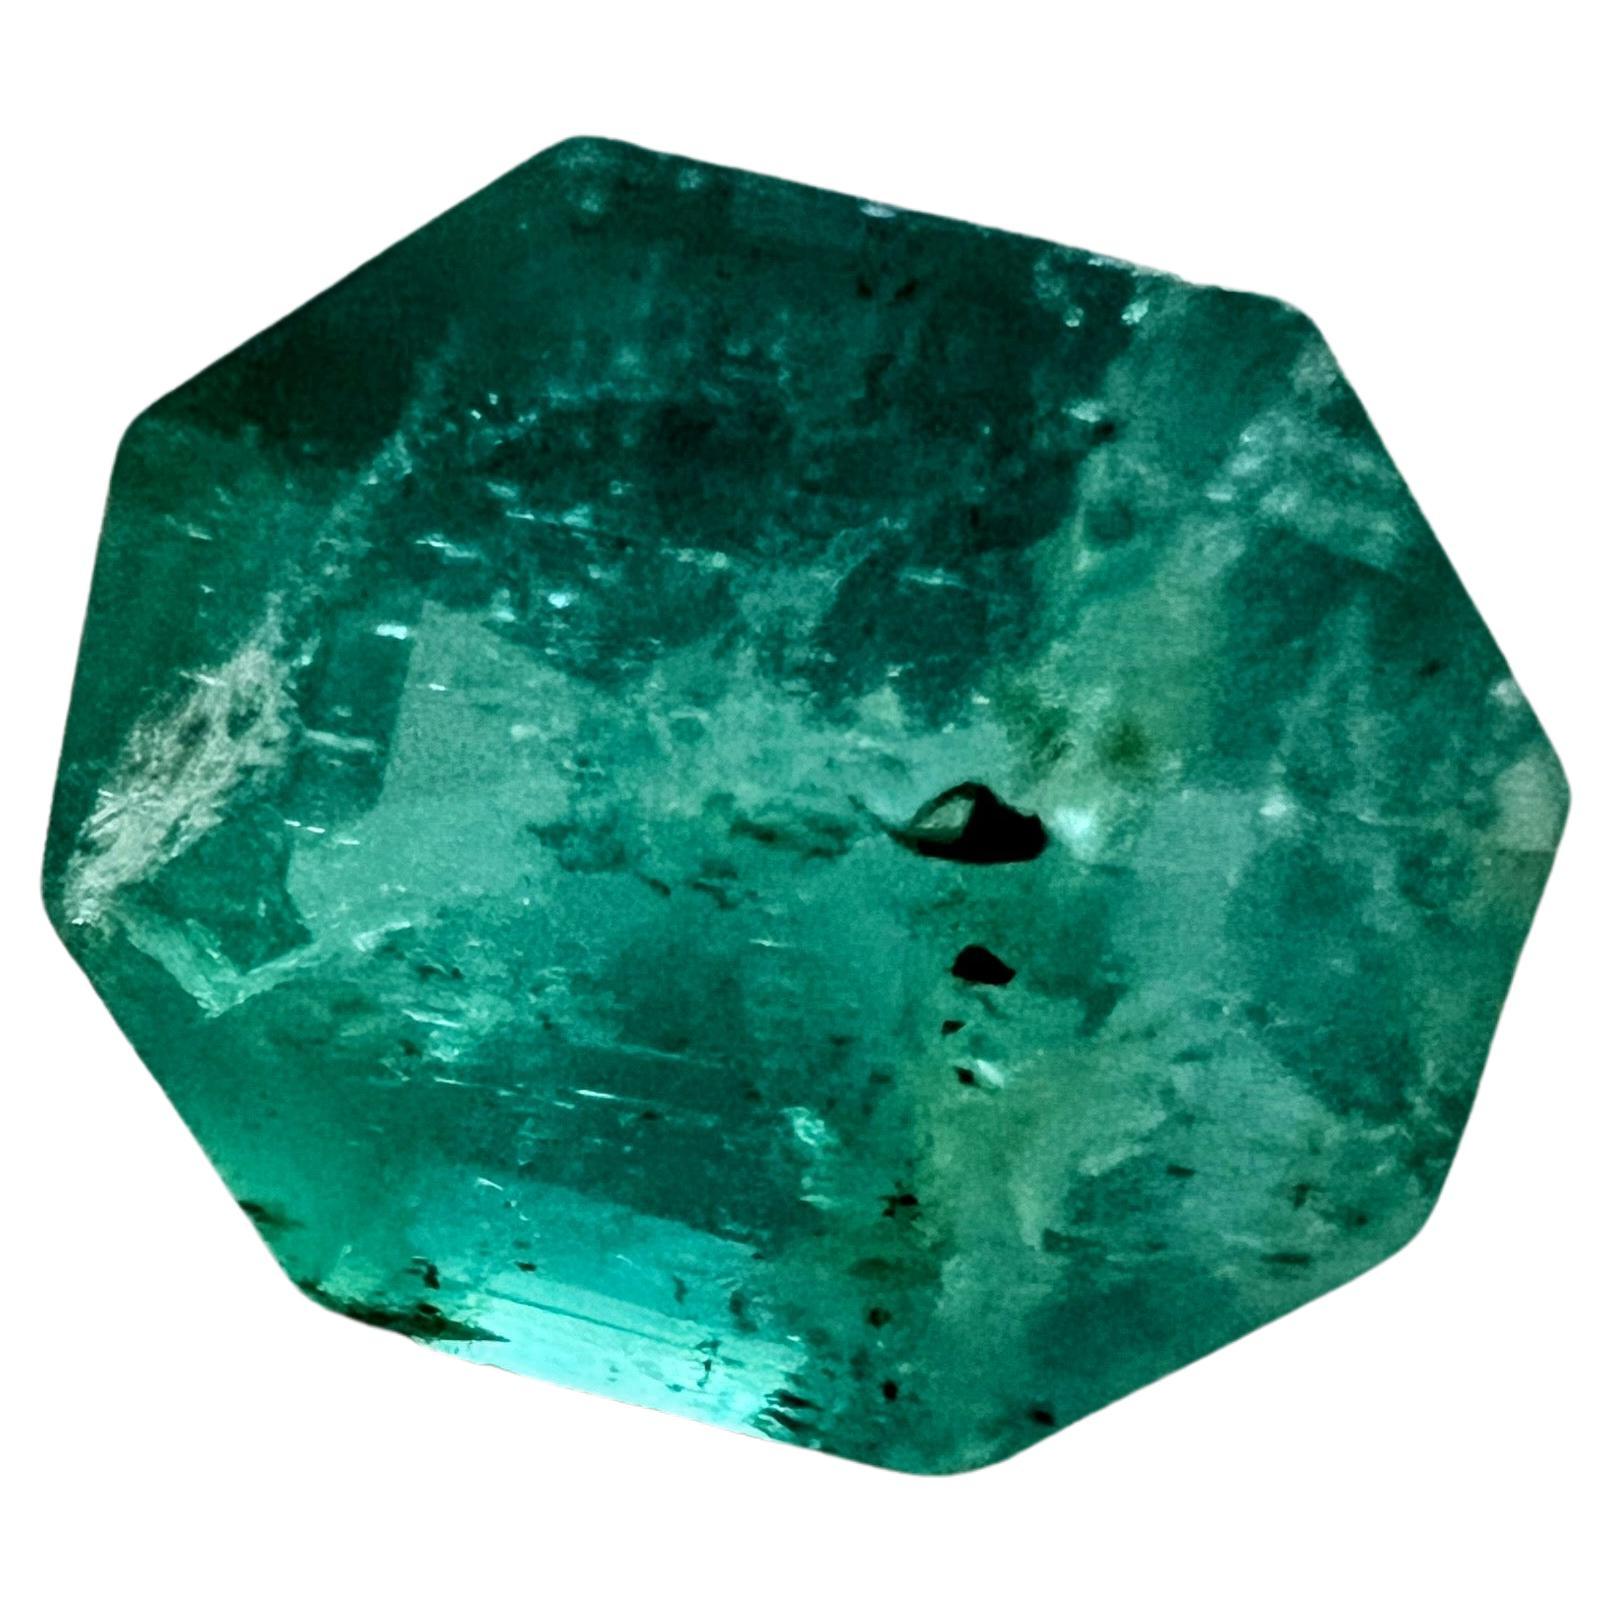 Octagon Cut 2.02ct Octagonal Cut No-Oil Natural Untreated Emerald Gemstone For Sale